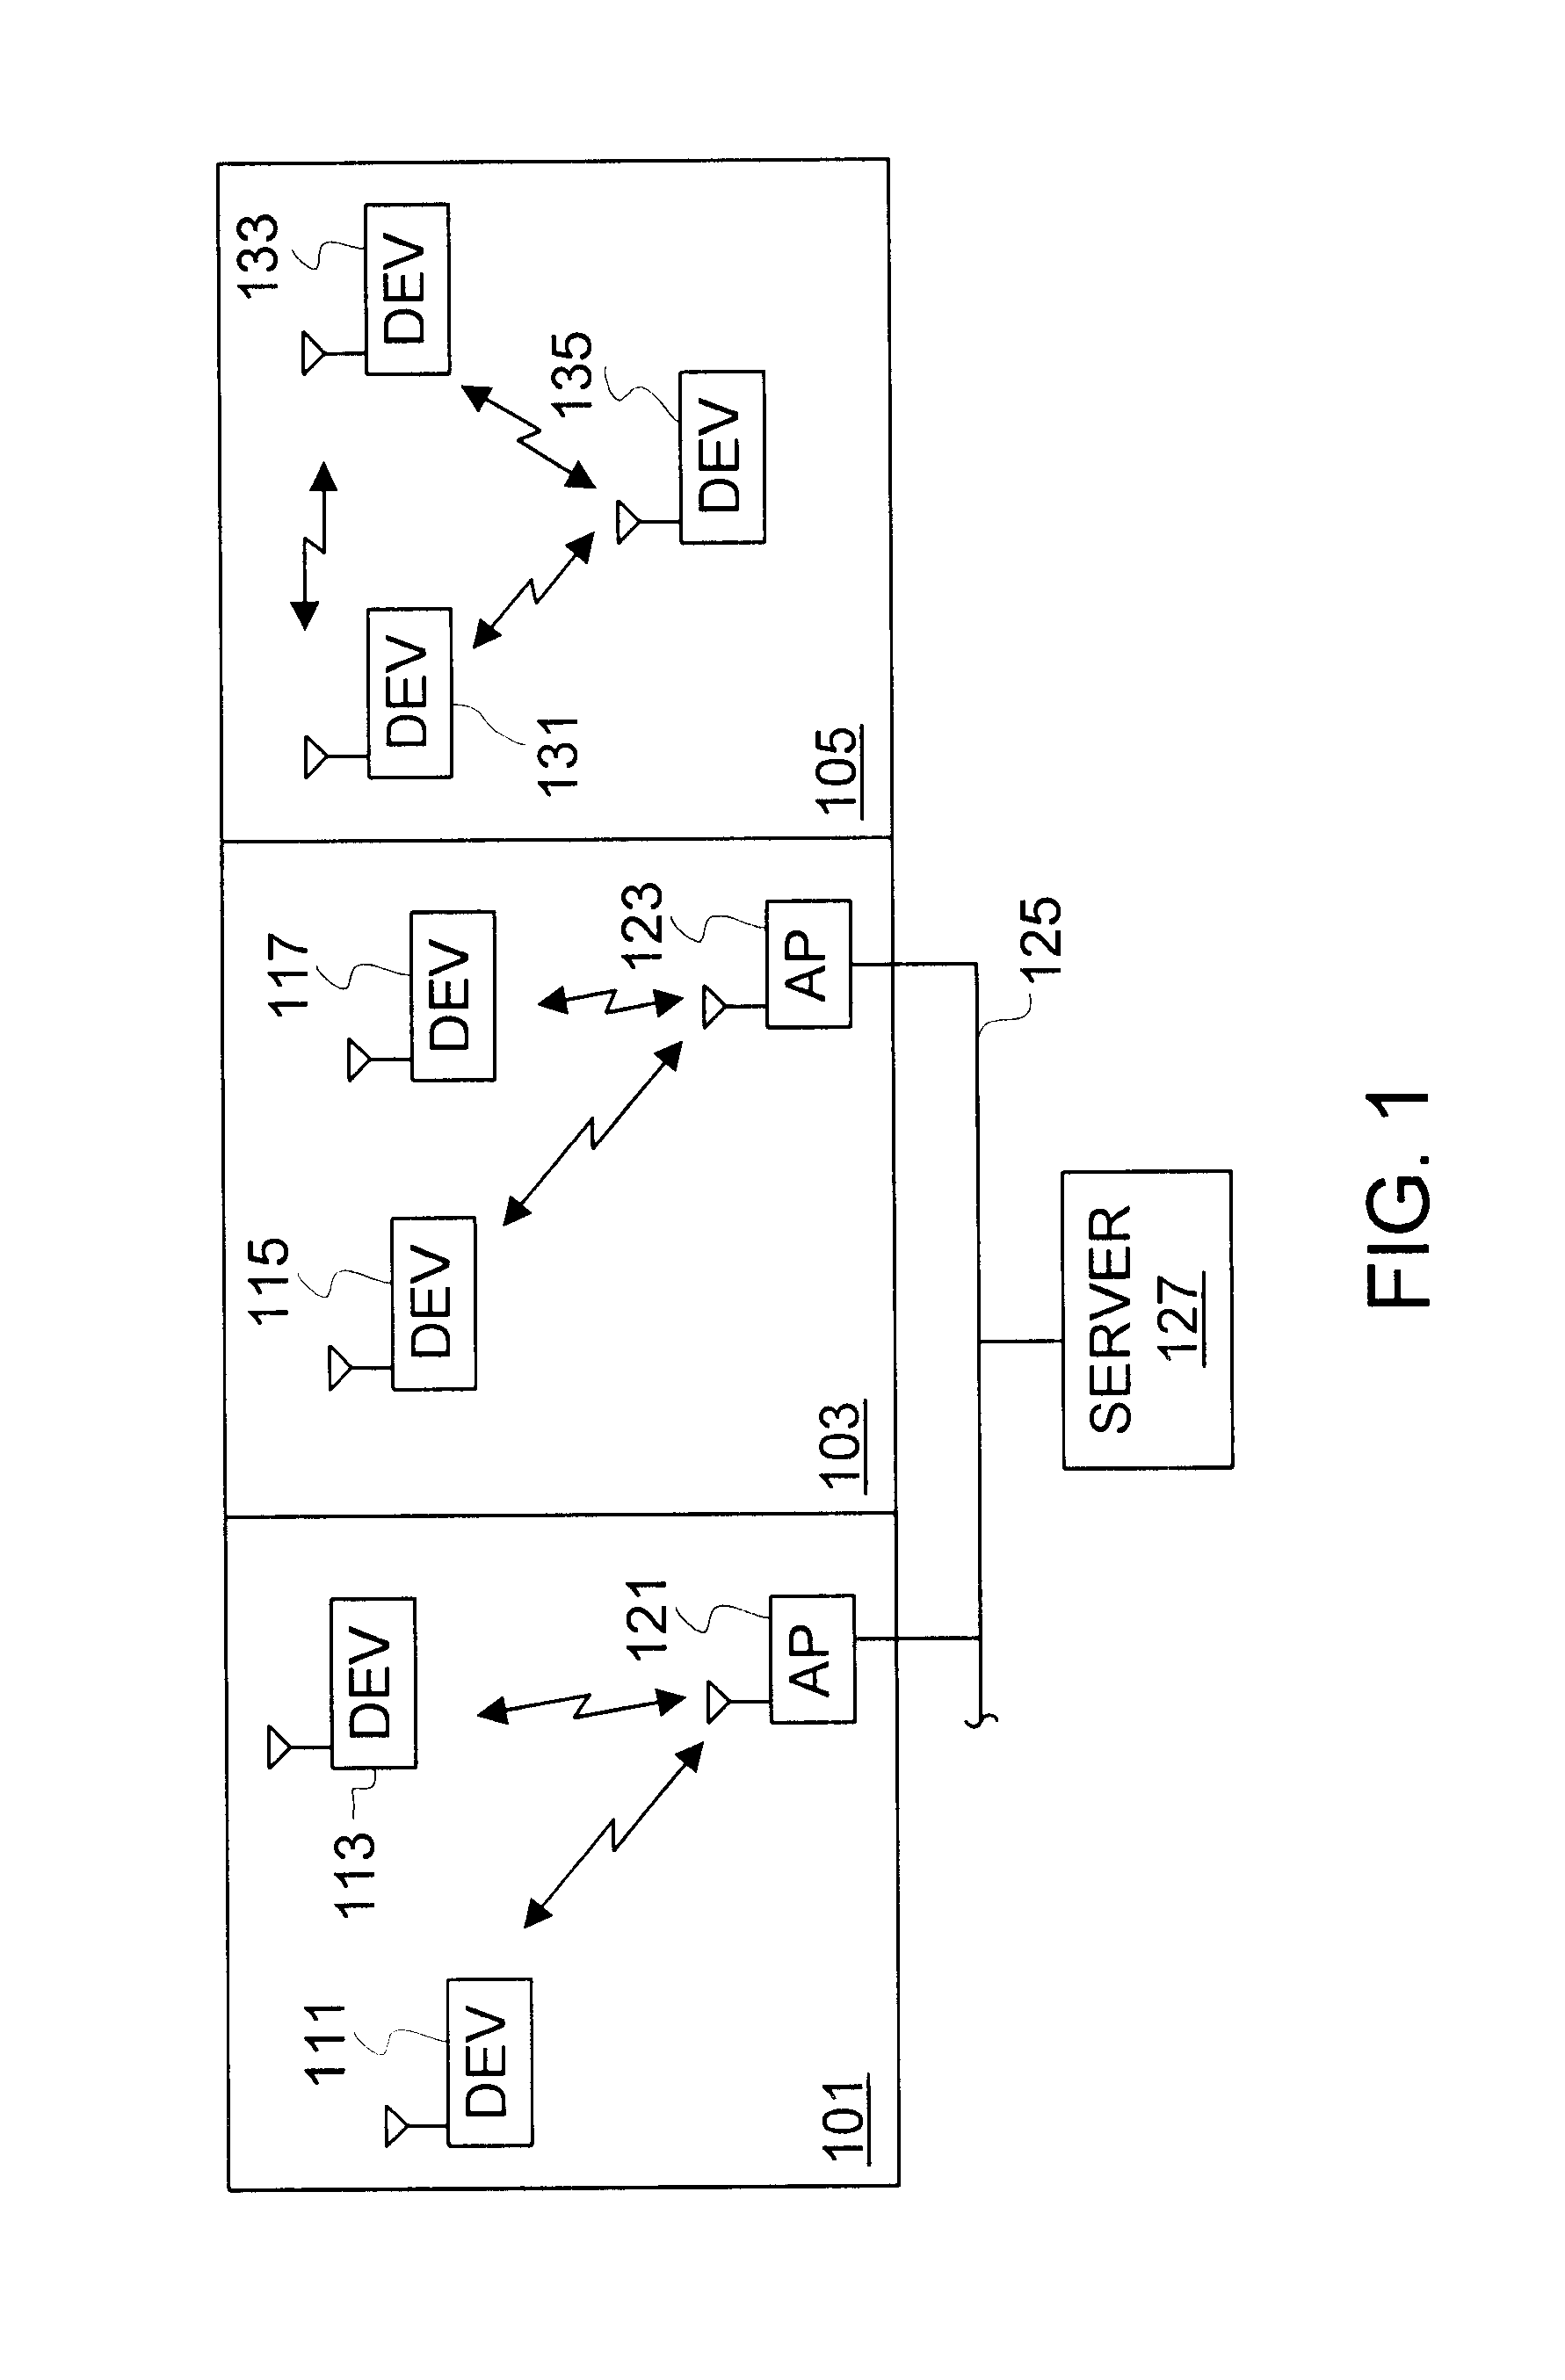 DC compensation system for a wireless communication device configured in a zero intermediate frequency architecture